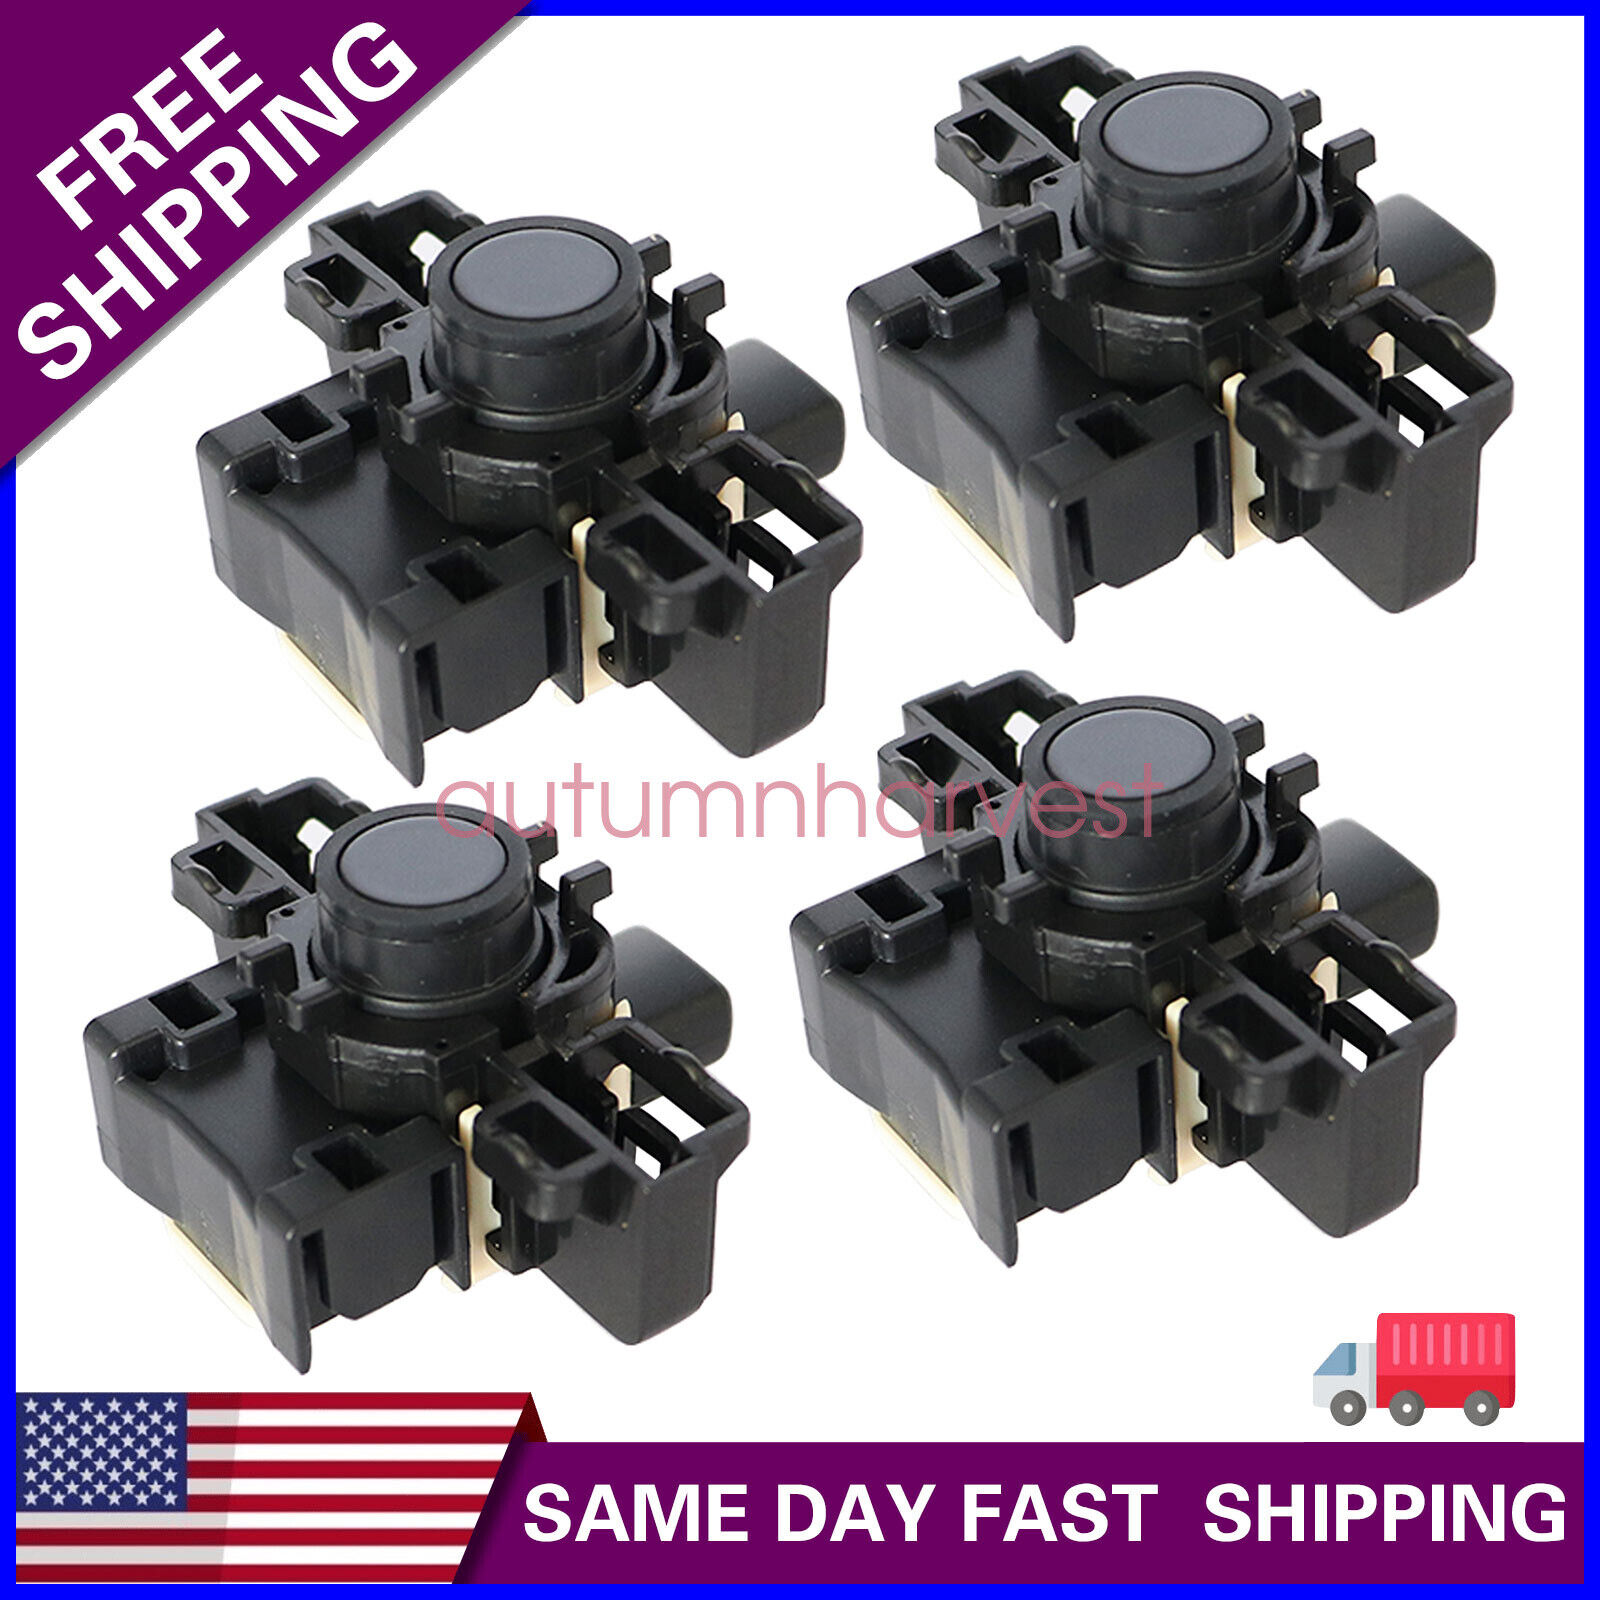 4X New Bumper Parking Sensor PDC For 2013-2015 IS350 IS250 GS350 89341-53010